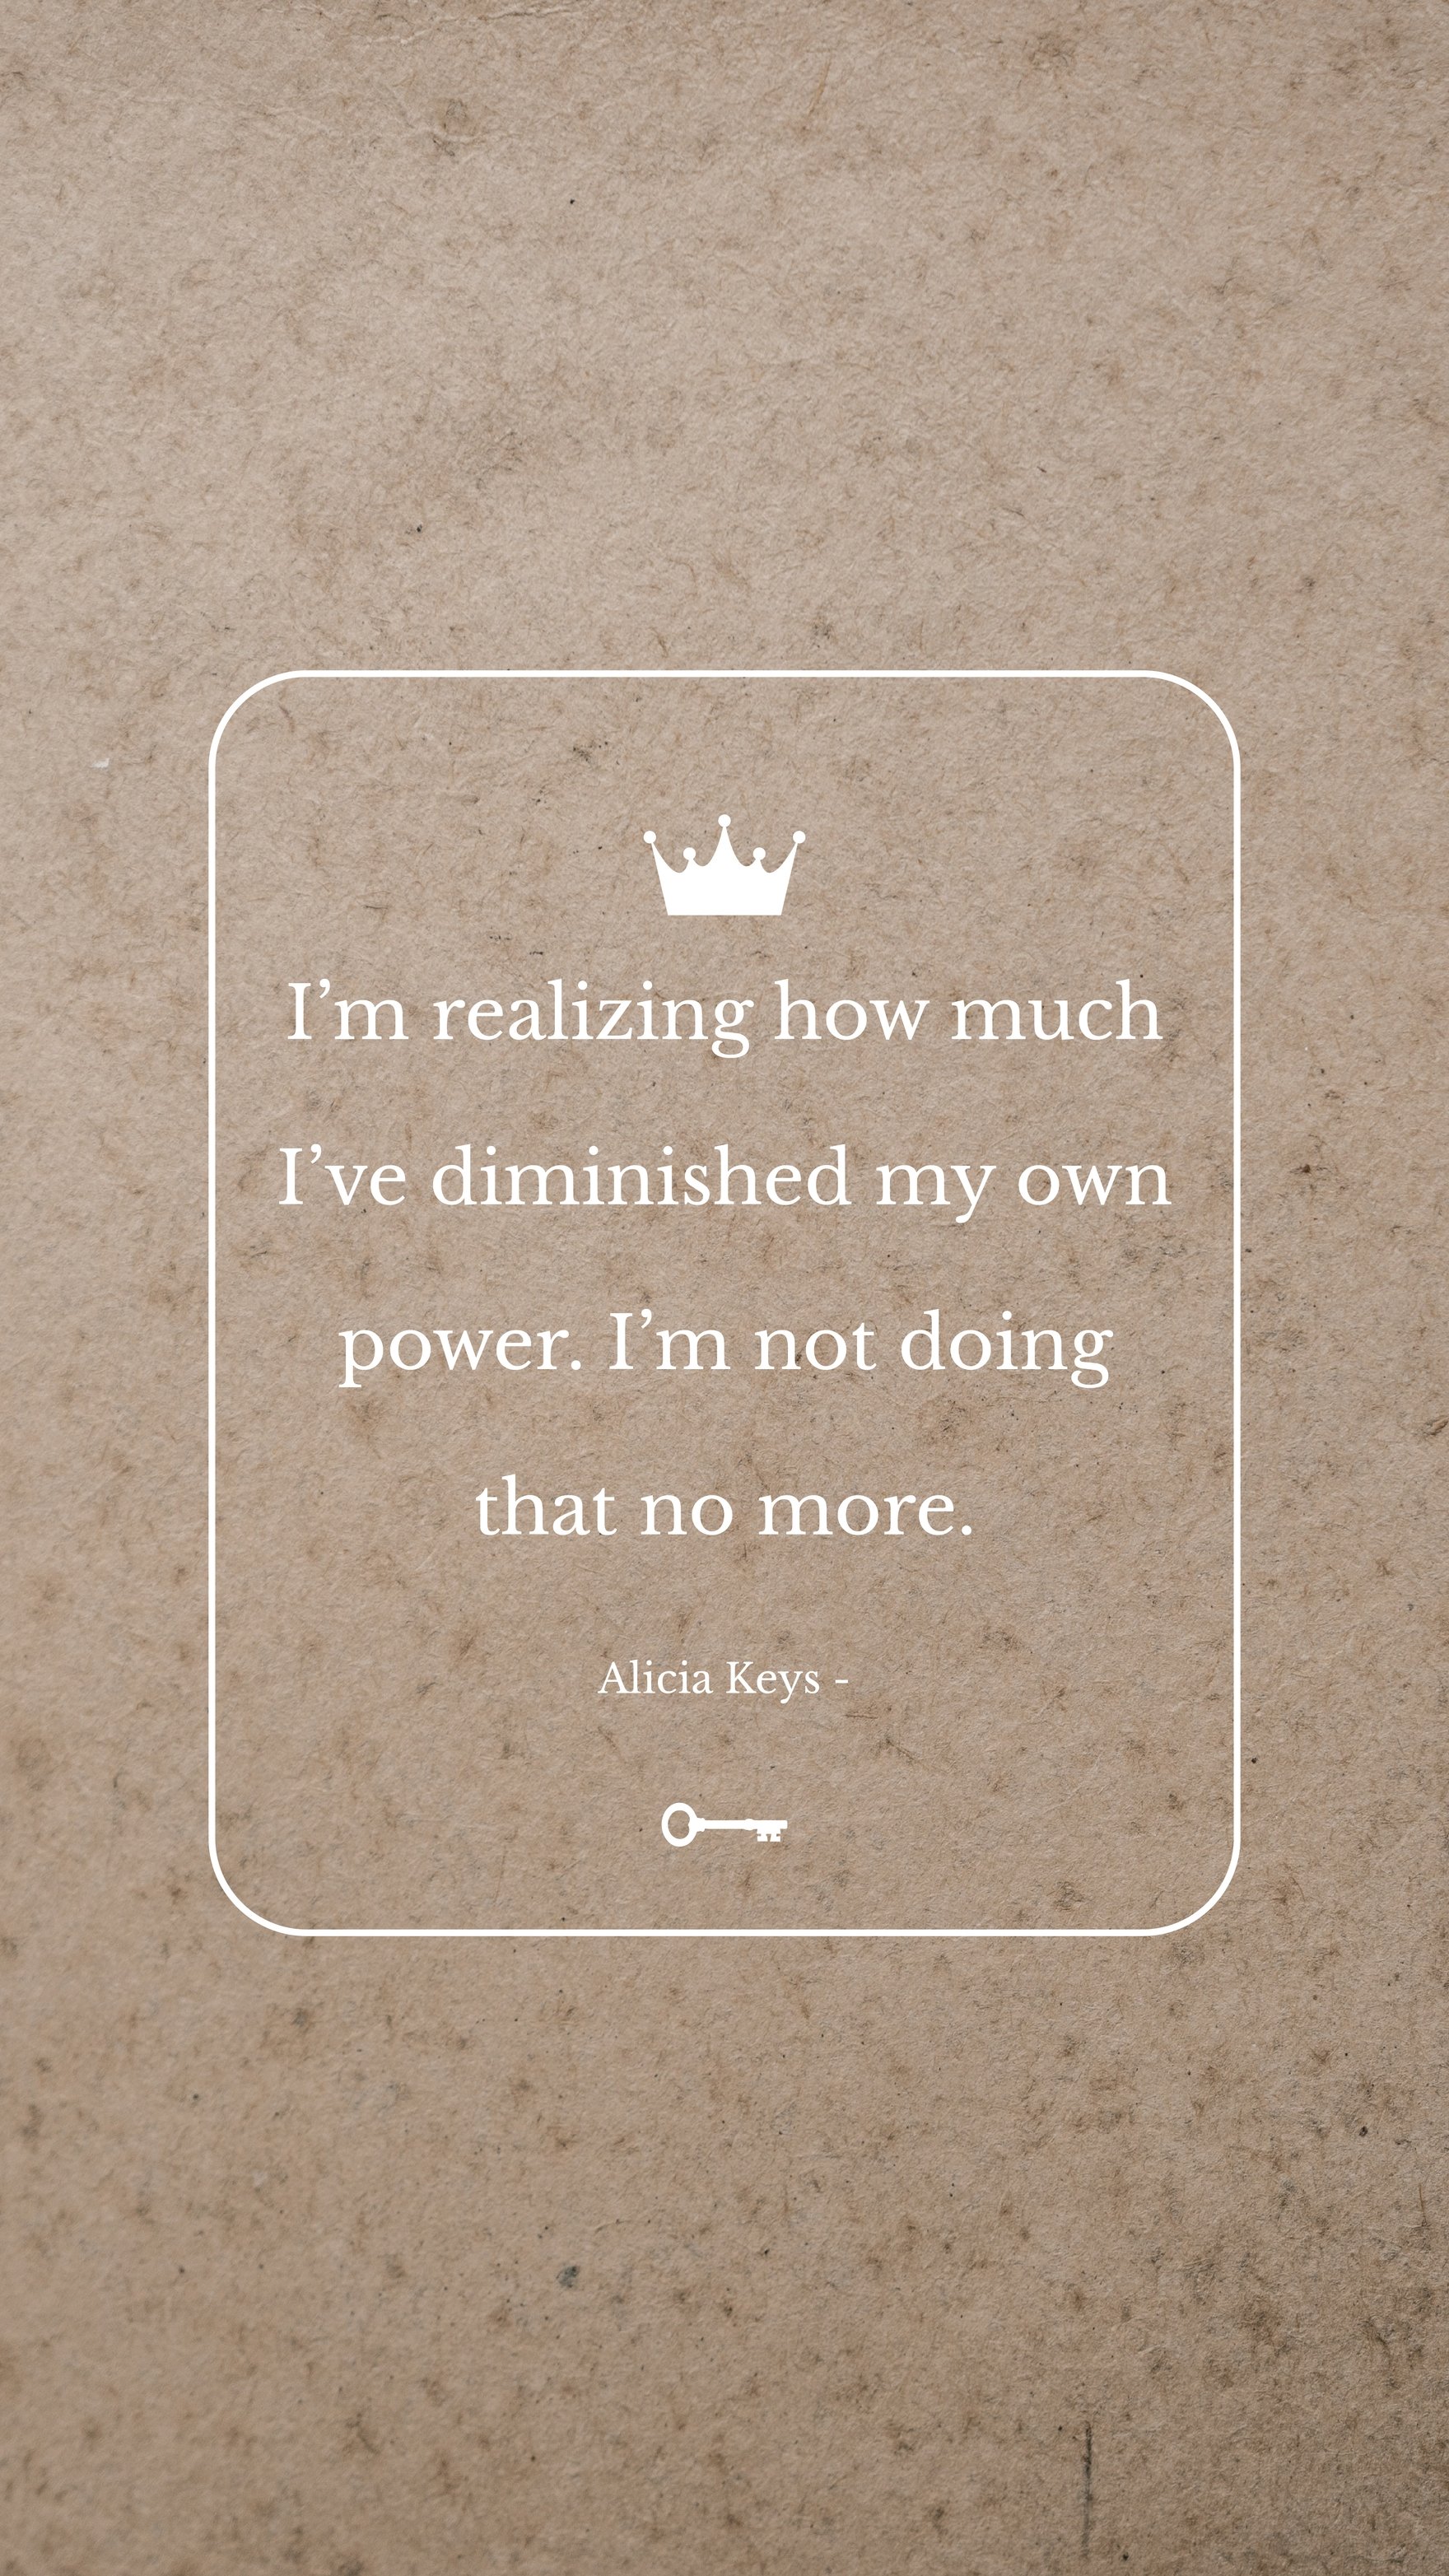 Alicia Keys - I’m realizing how much I’ve diminished my own power. I’m not doing that no more.